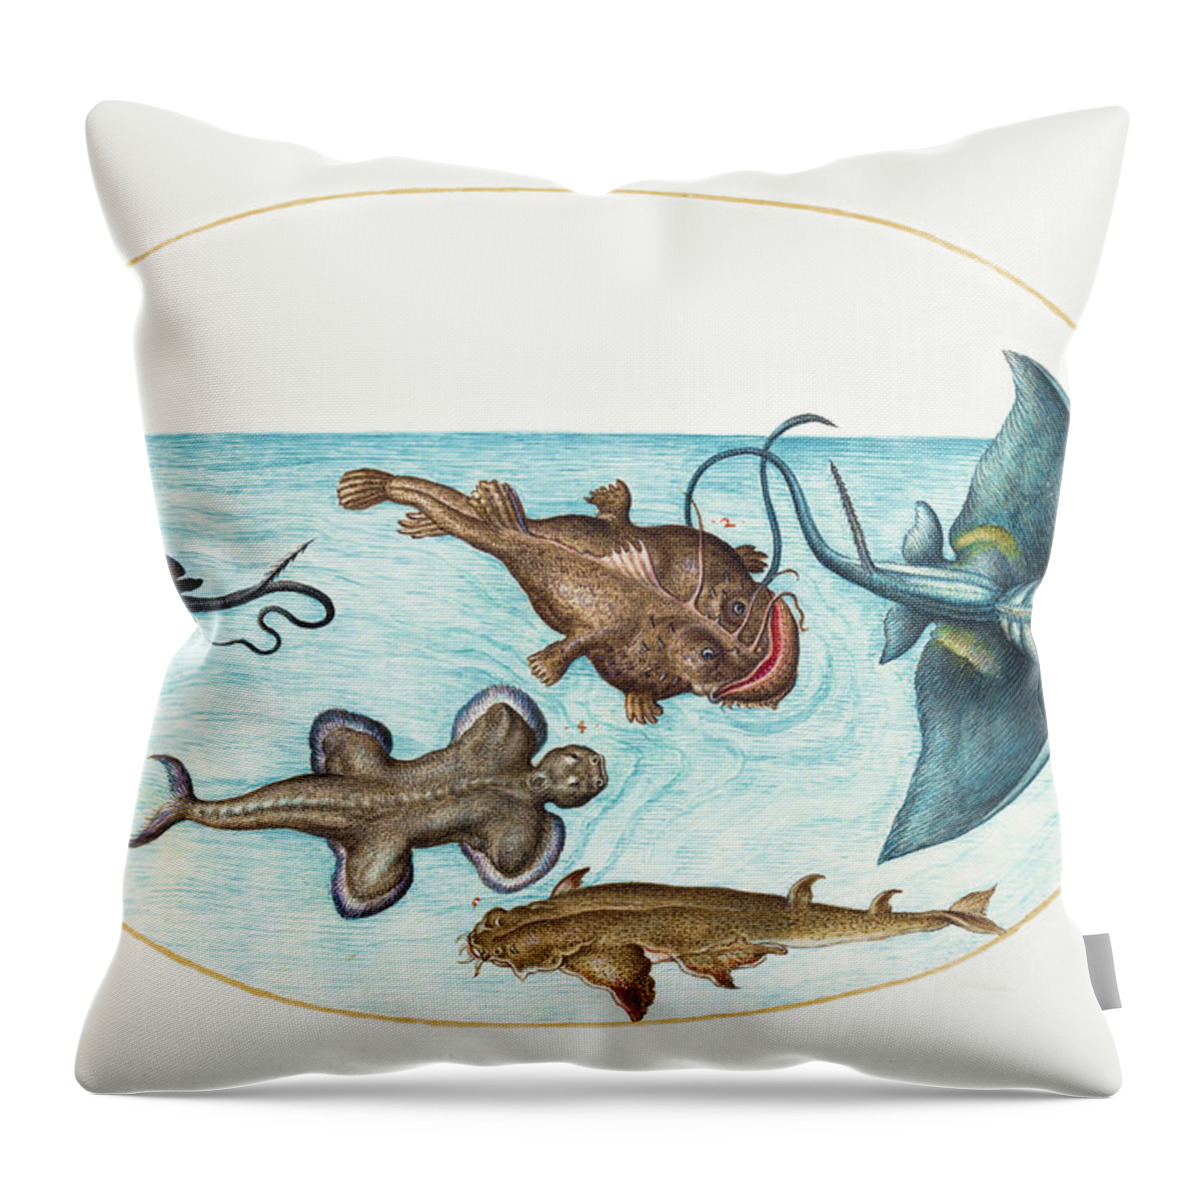 Great Throw Pillow featuring the painting Two Stingrays A  Monkfish and Angel Shark by MotionAge Designs